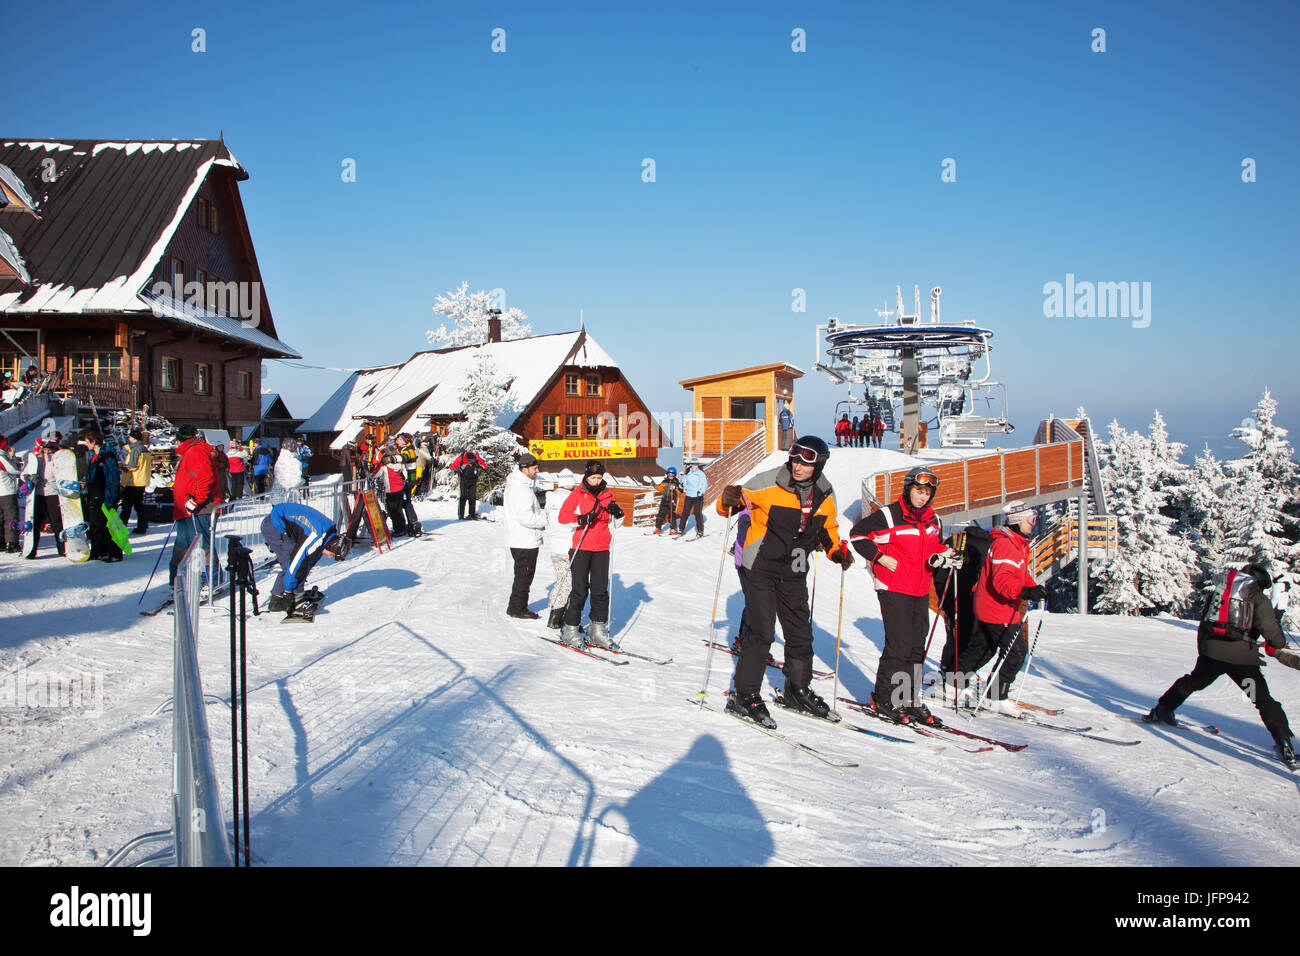 Skiers prepare for descent on skis Stock Photo